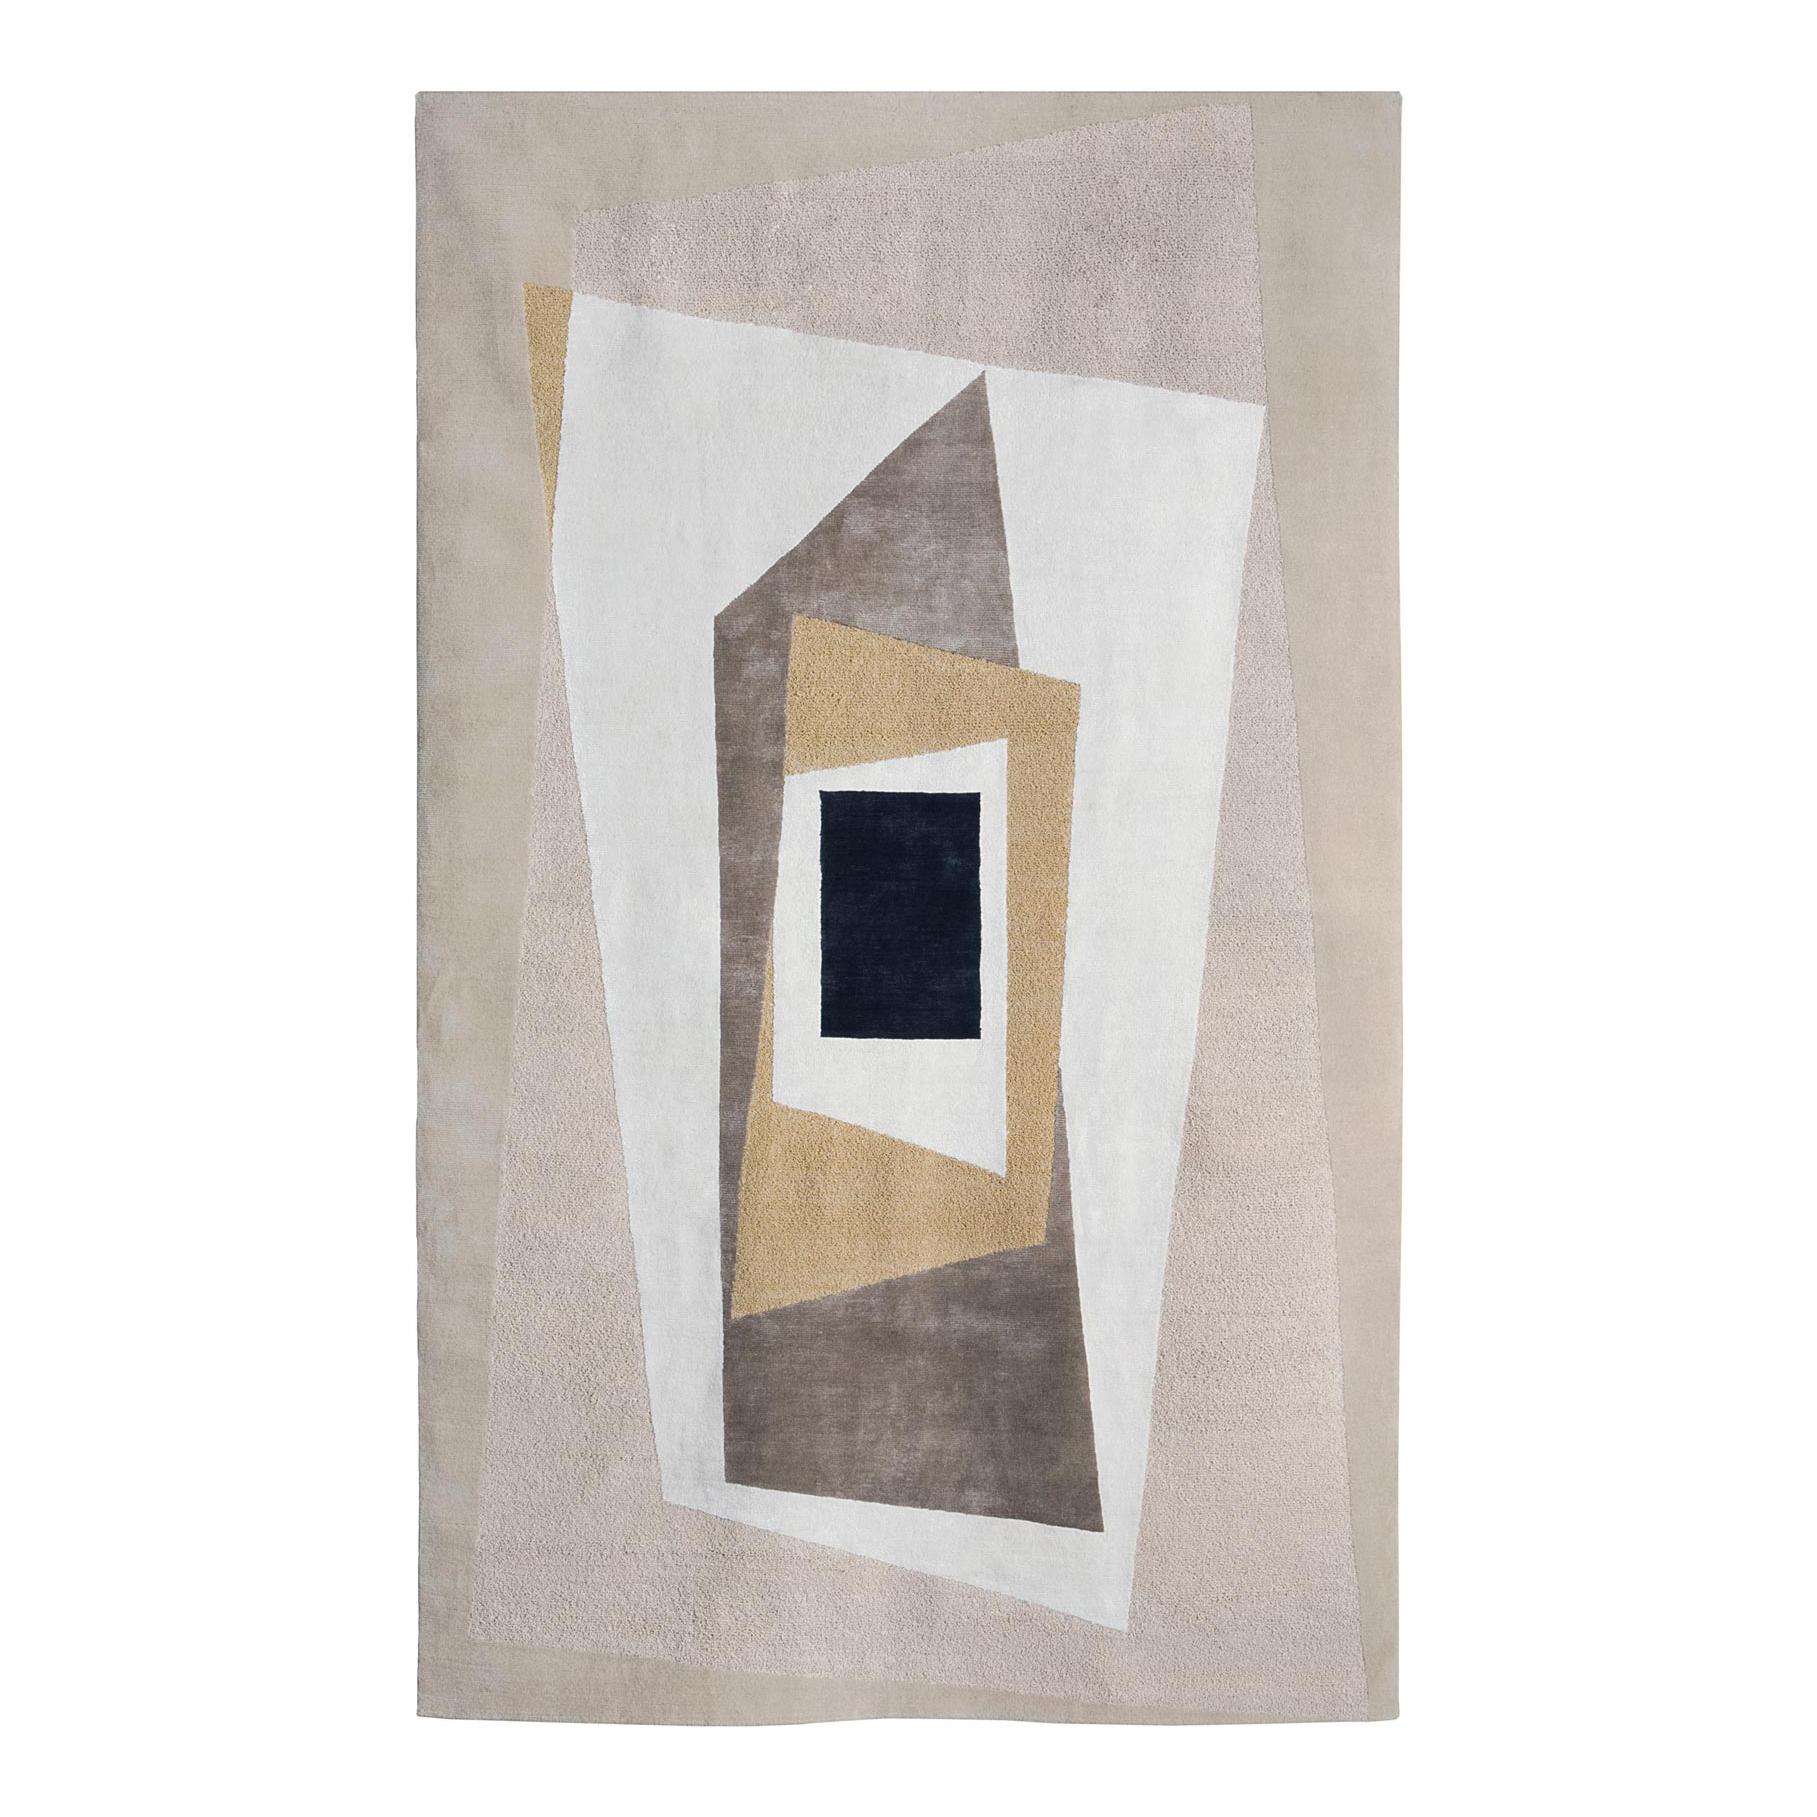 Produced in association with the Josef and Anni Albers Foundation.

The design for this beautiful rug is based on a tapestry study that is part of MoMA's permanent collection.

Albers is one of the most influential textile artists of the 20th